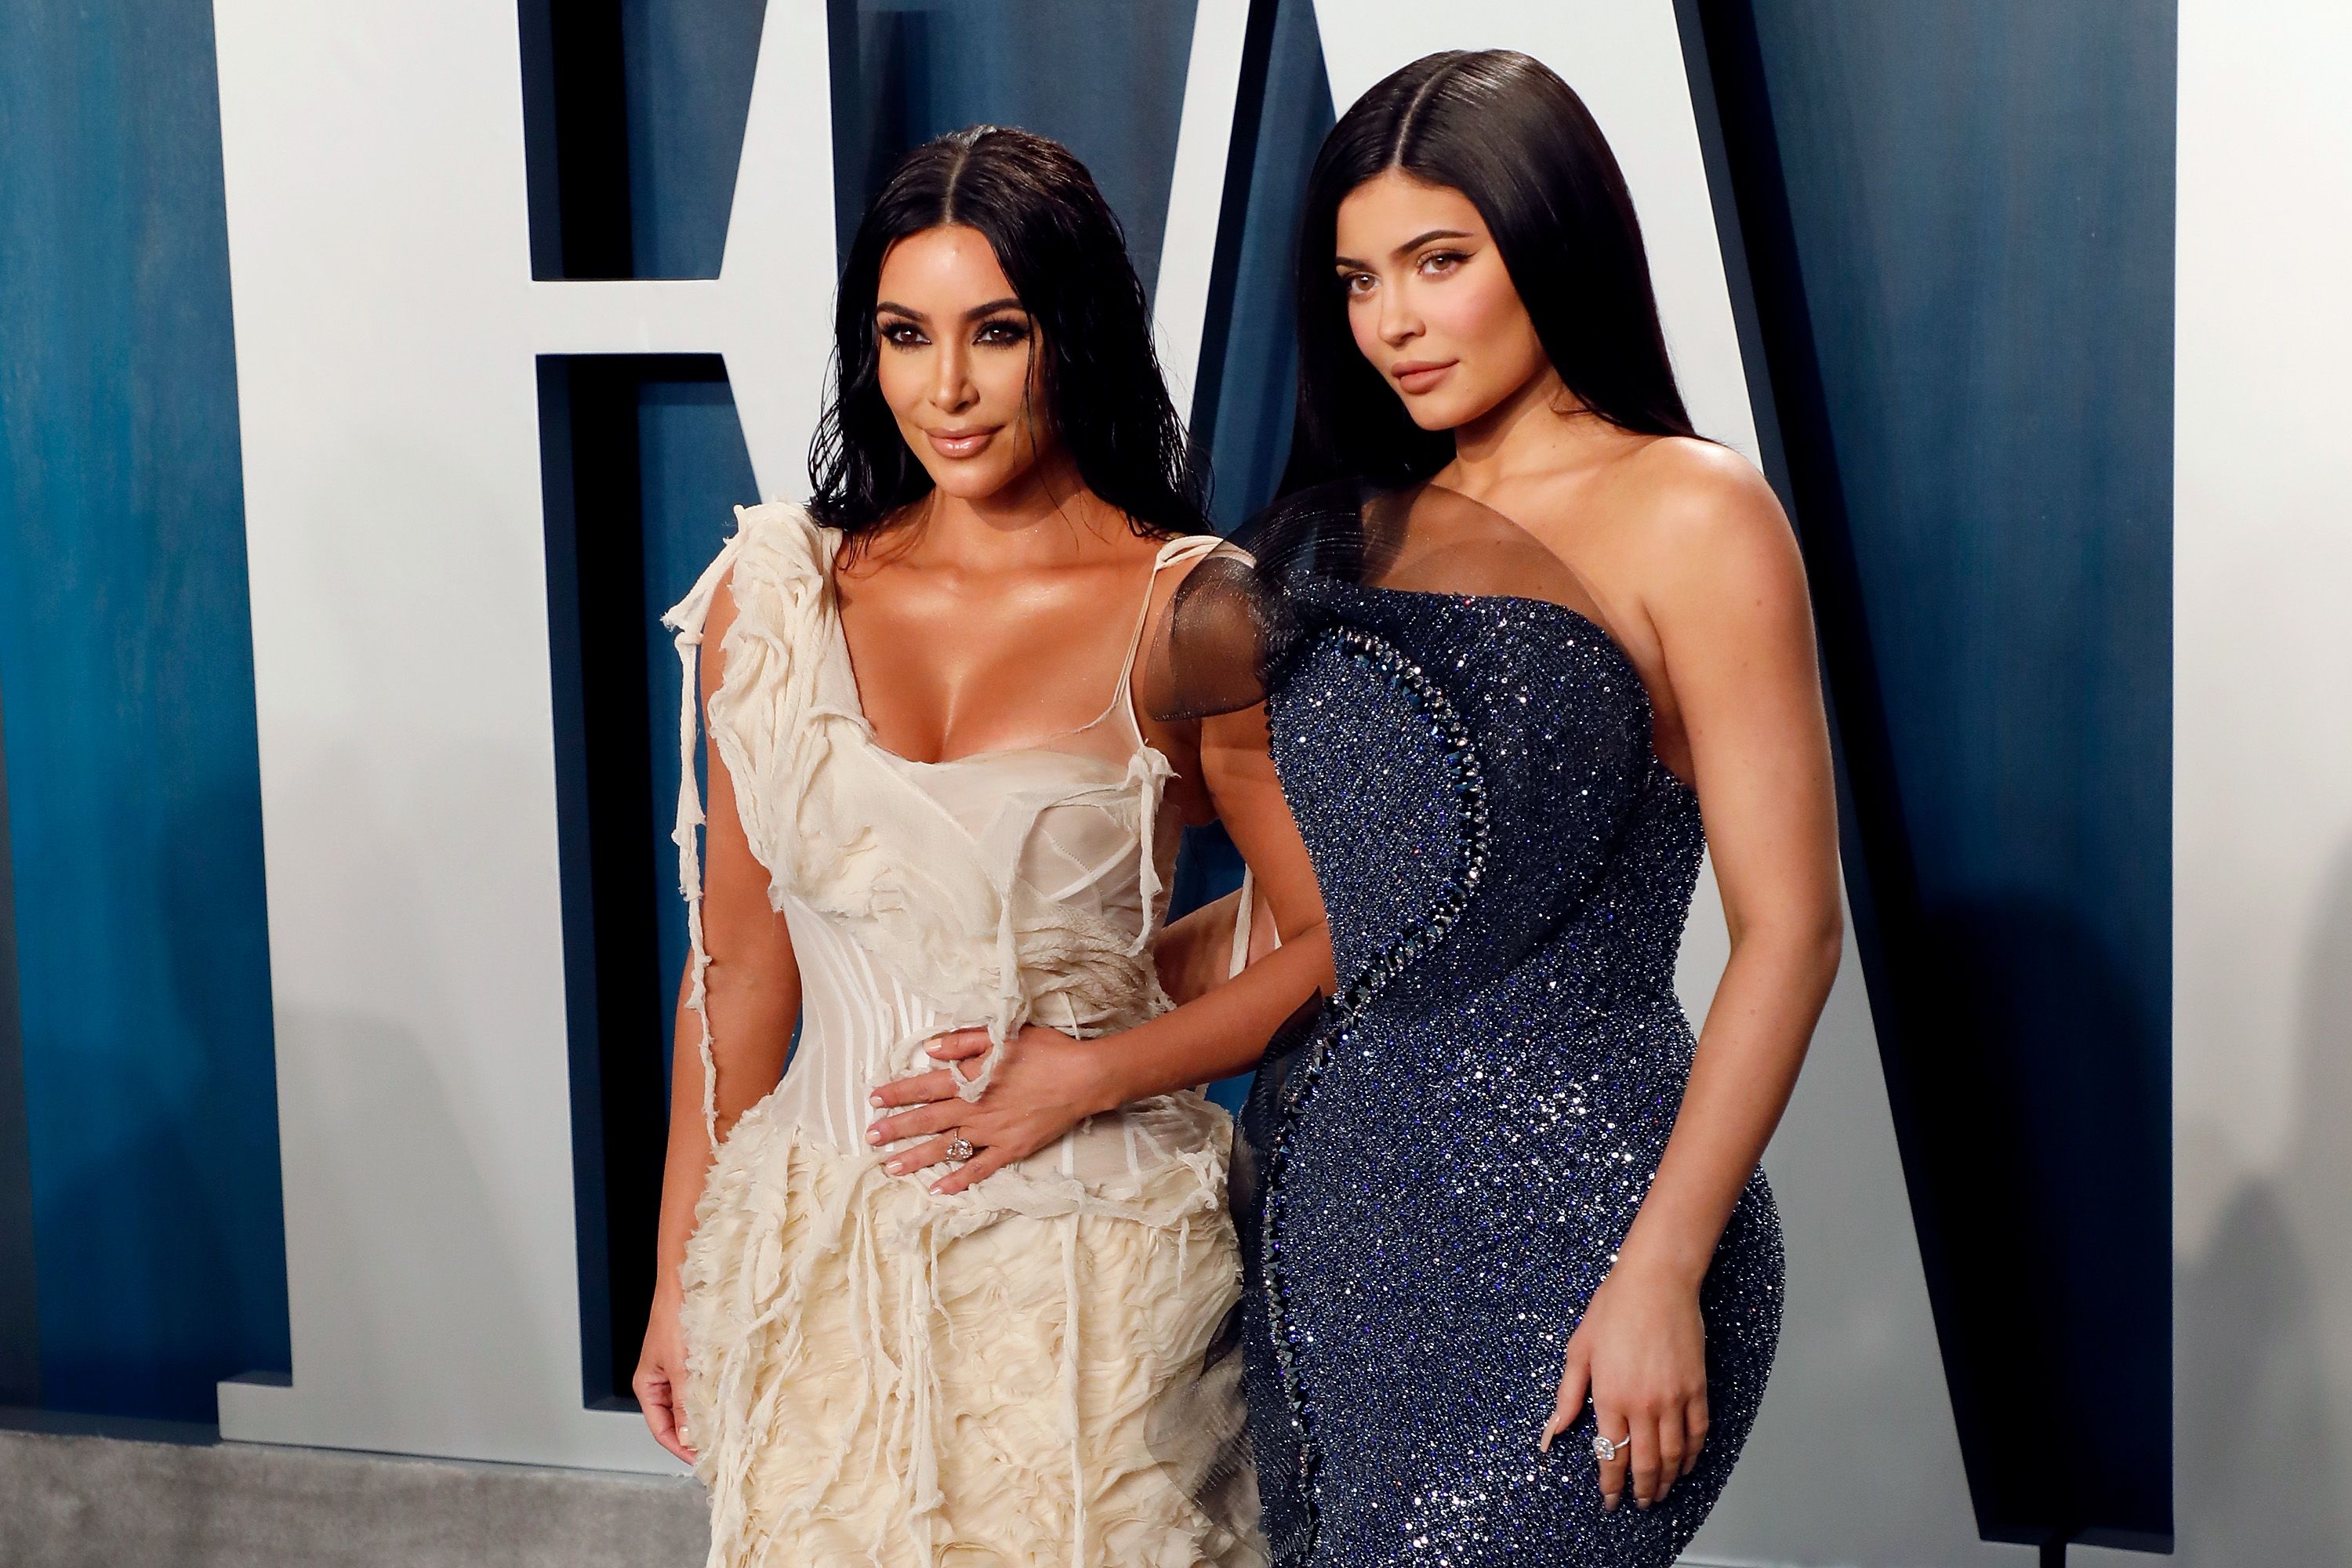 Kim Kardashian West and Kylie Jenner attend the 2020 Vanity Fair Oscar Party at Wallis Annenberg Center for the Performing Arts on February 09, 2020 in Beverly Hills, California. | Source: Getty Images